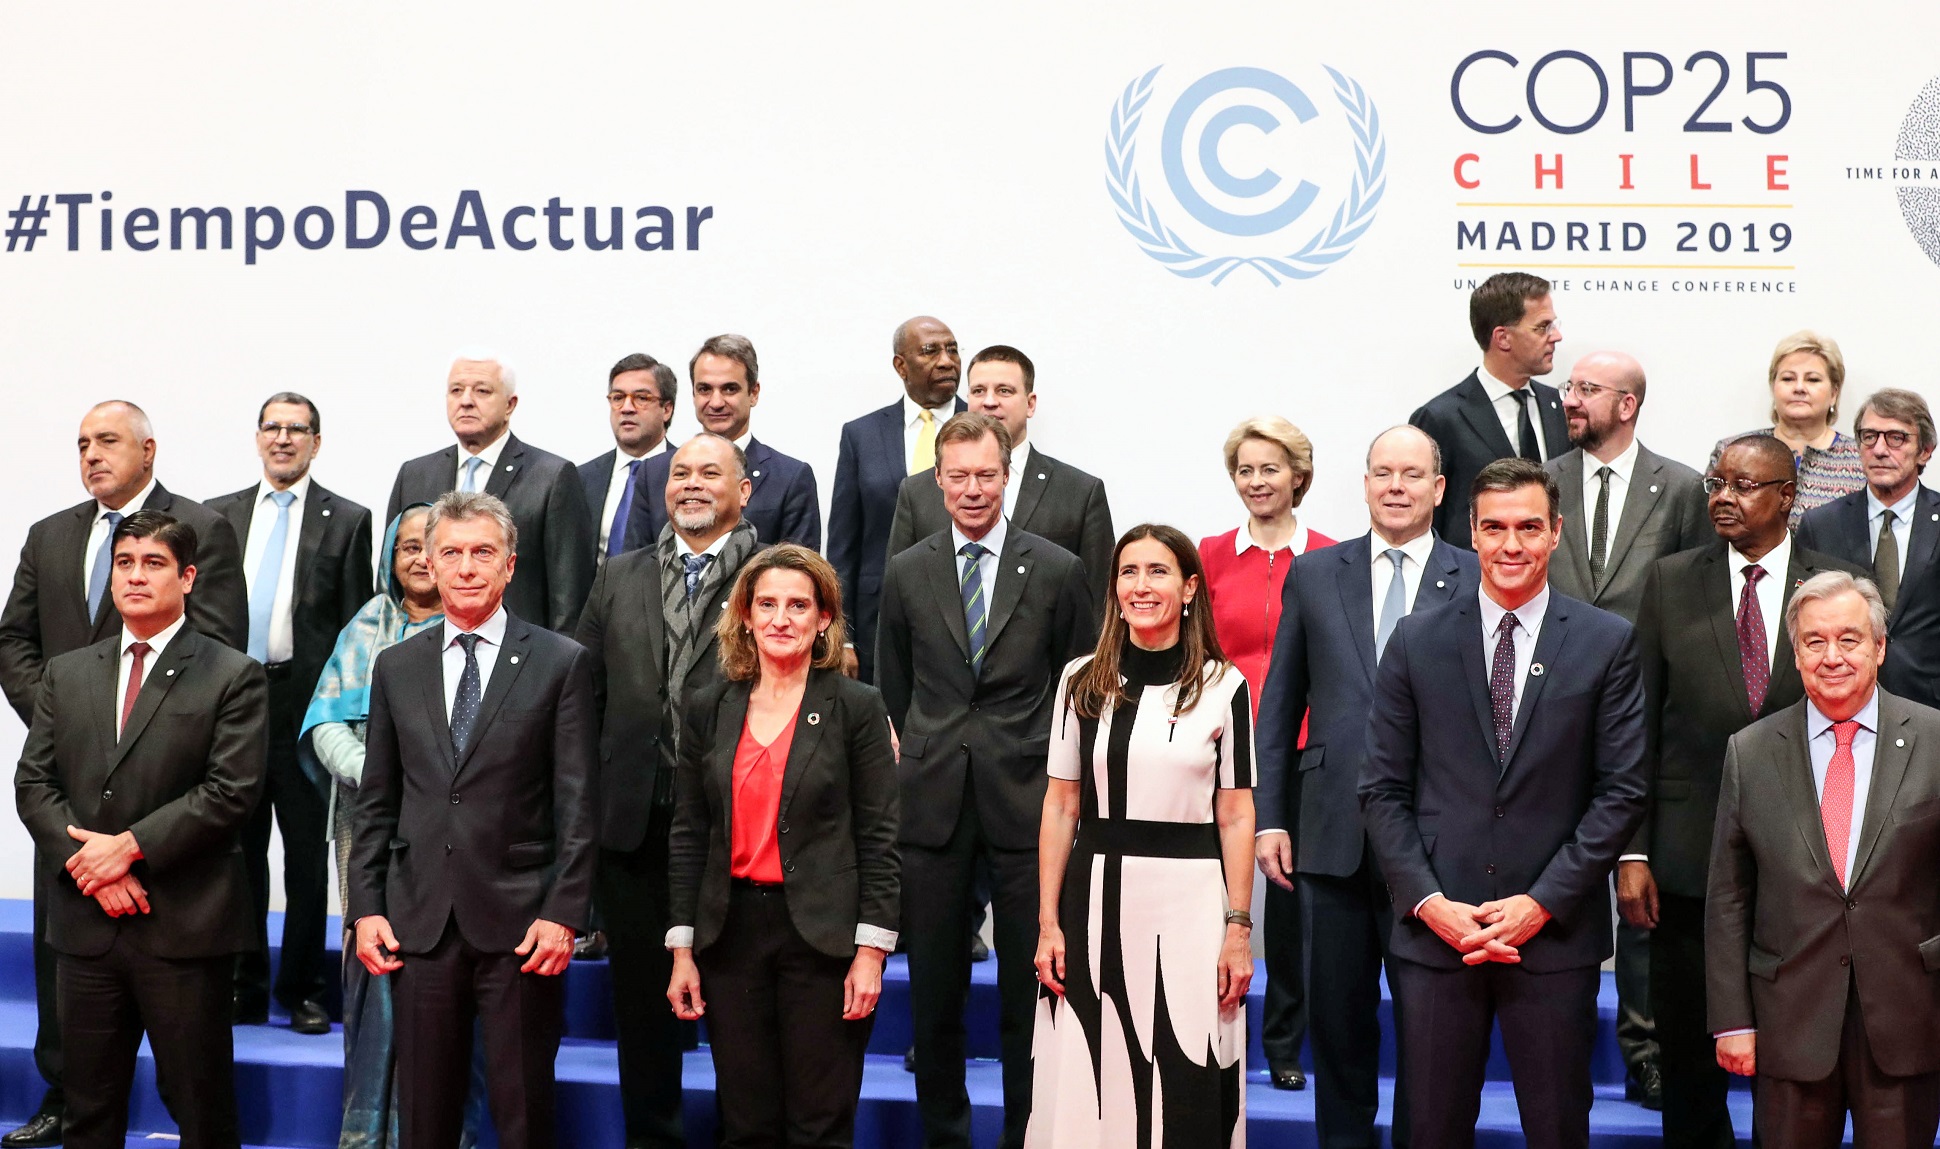 An image of delegates at the COP25 conference in Madrid, 2019.